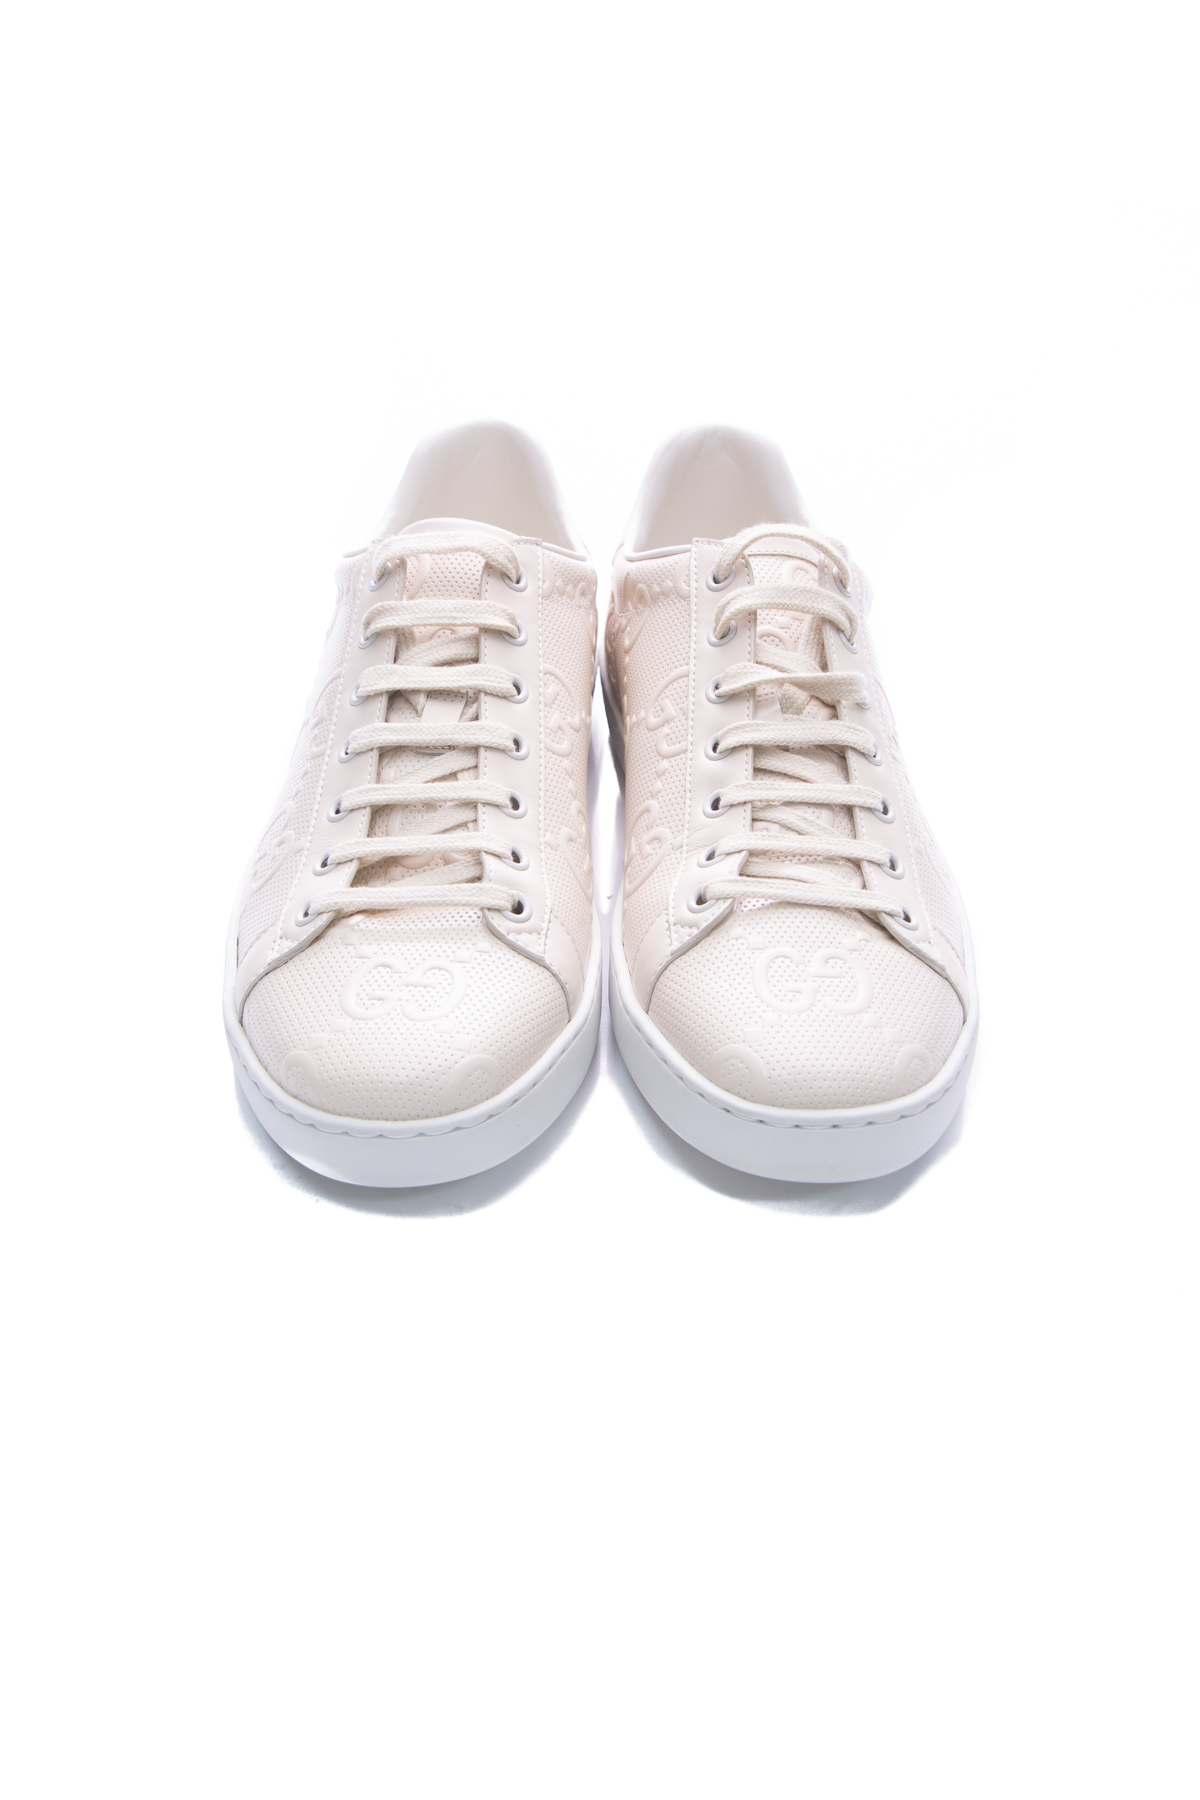 Gucci Ace GG Embossed Sneaker - Size 41.5